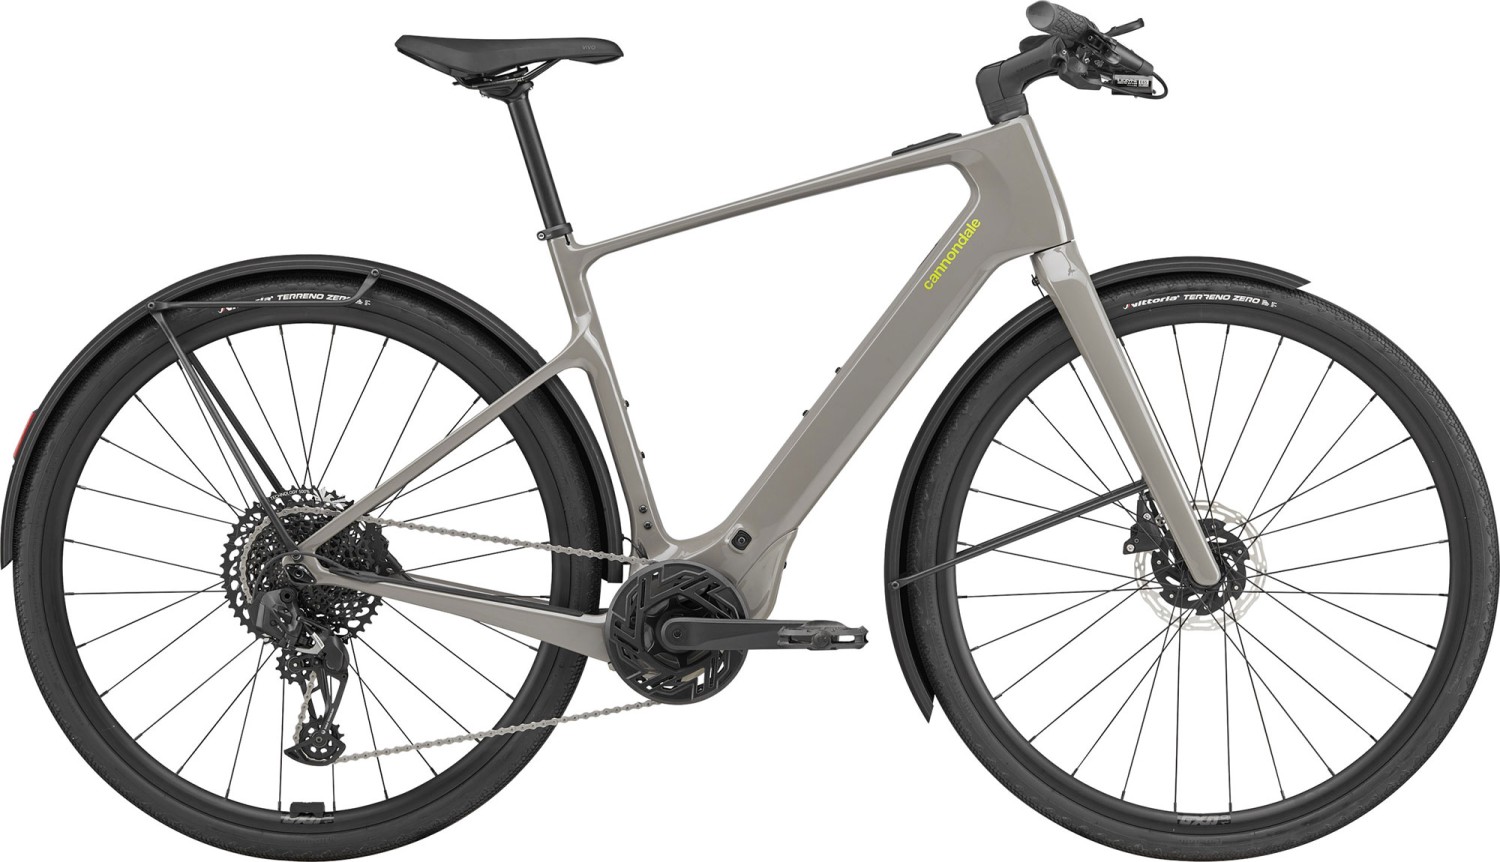 CANNONDALE TESORO NEO CARBON 1 - S SGY